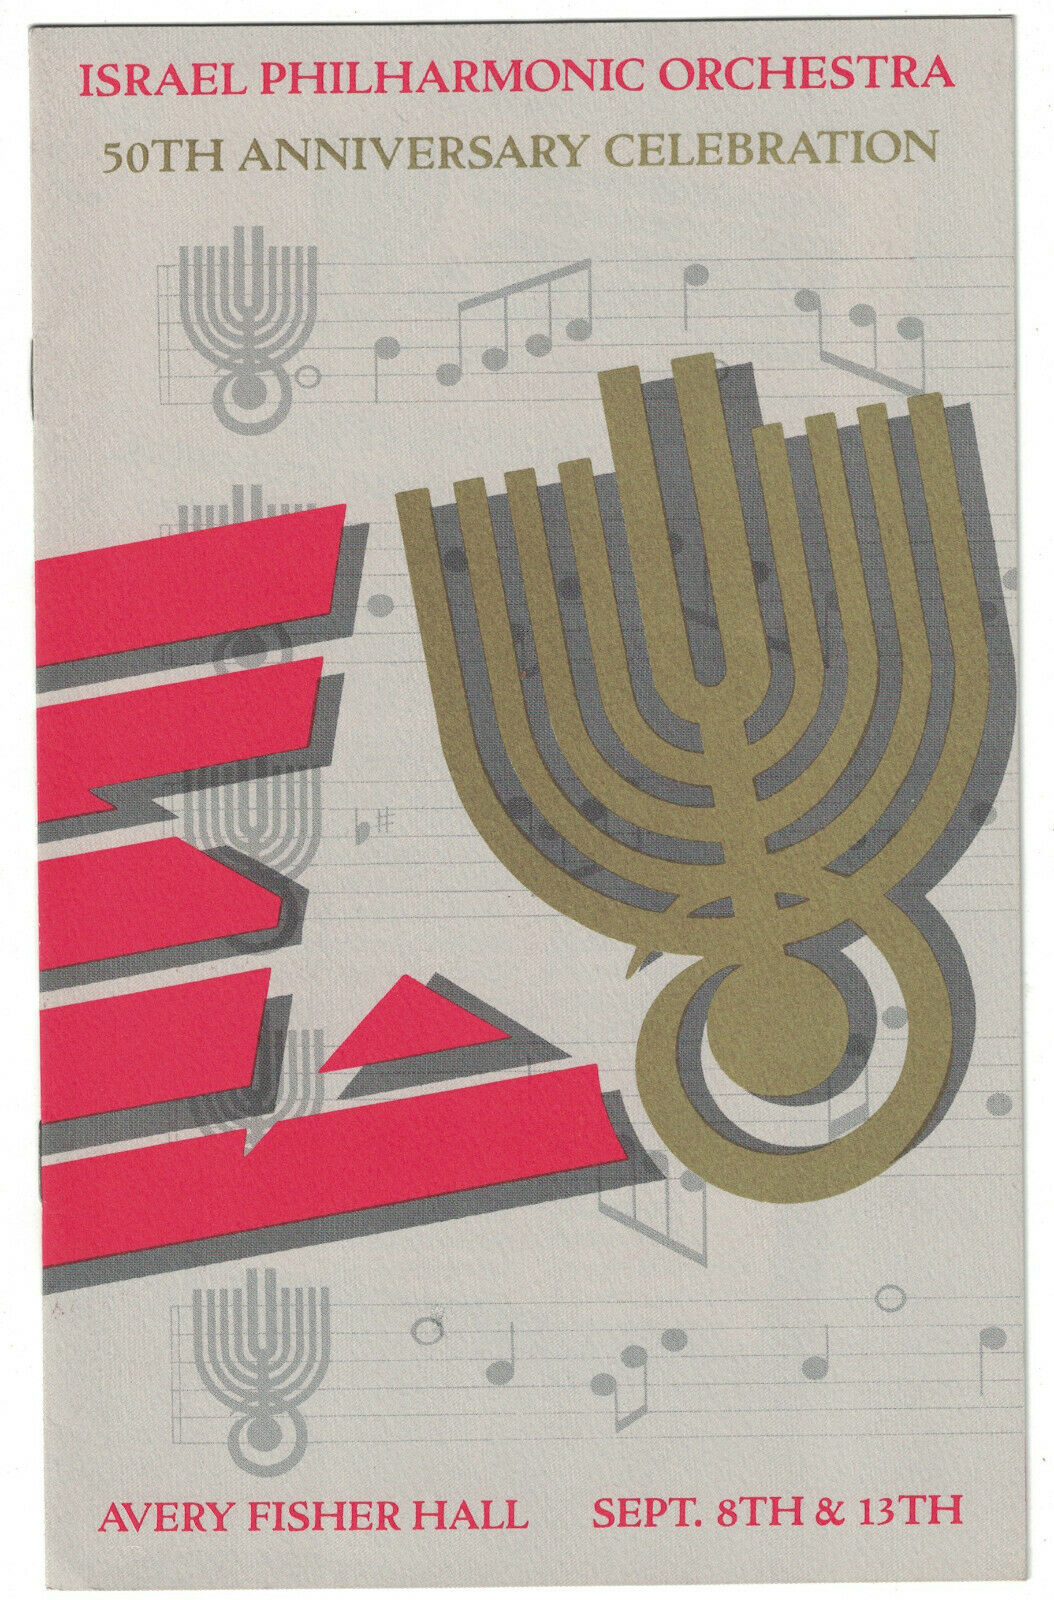 1986 Israel Philharmonic Orchestra 50th Anniversary Concert Sponsors